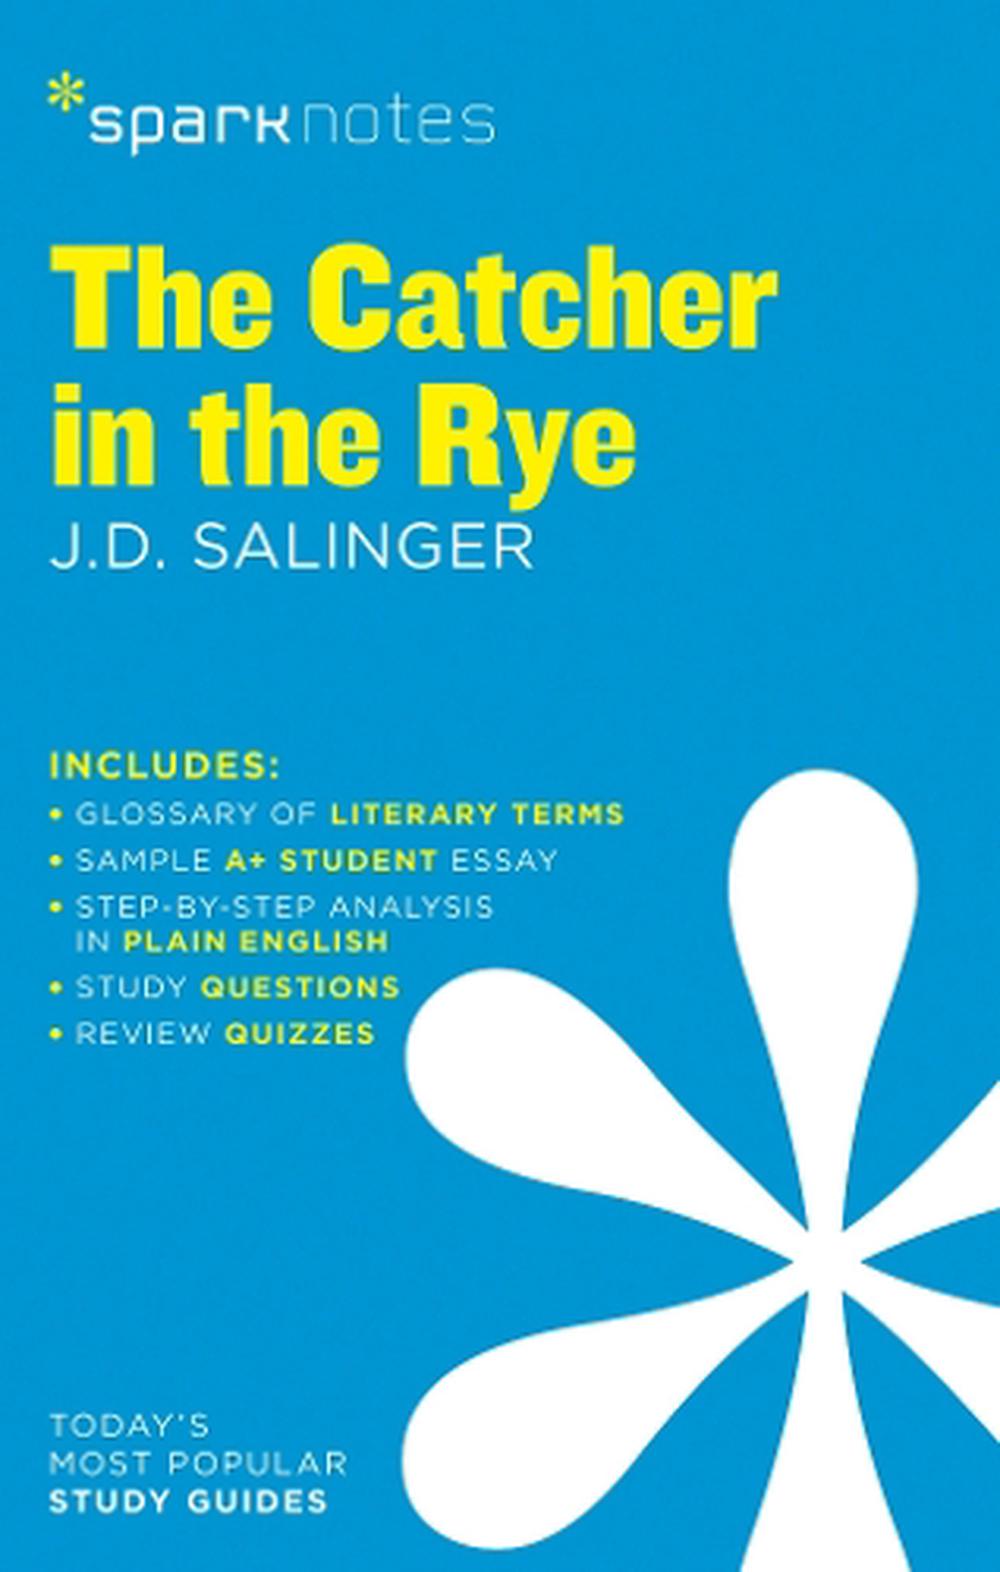 Literary Analysis Essay Topics For The Catcher In The Rye